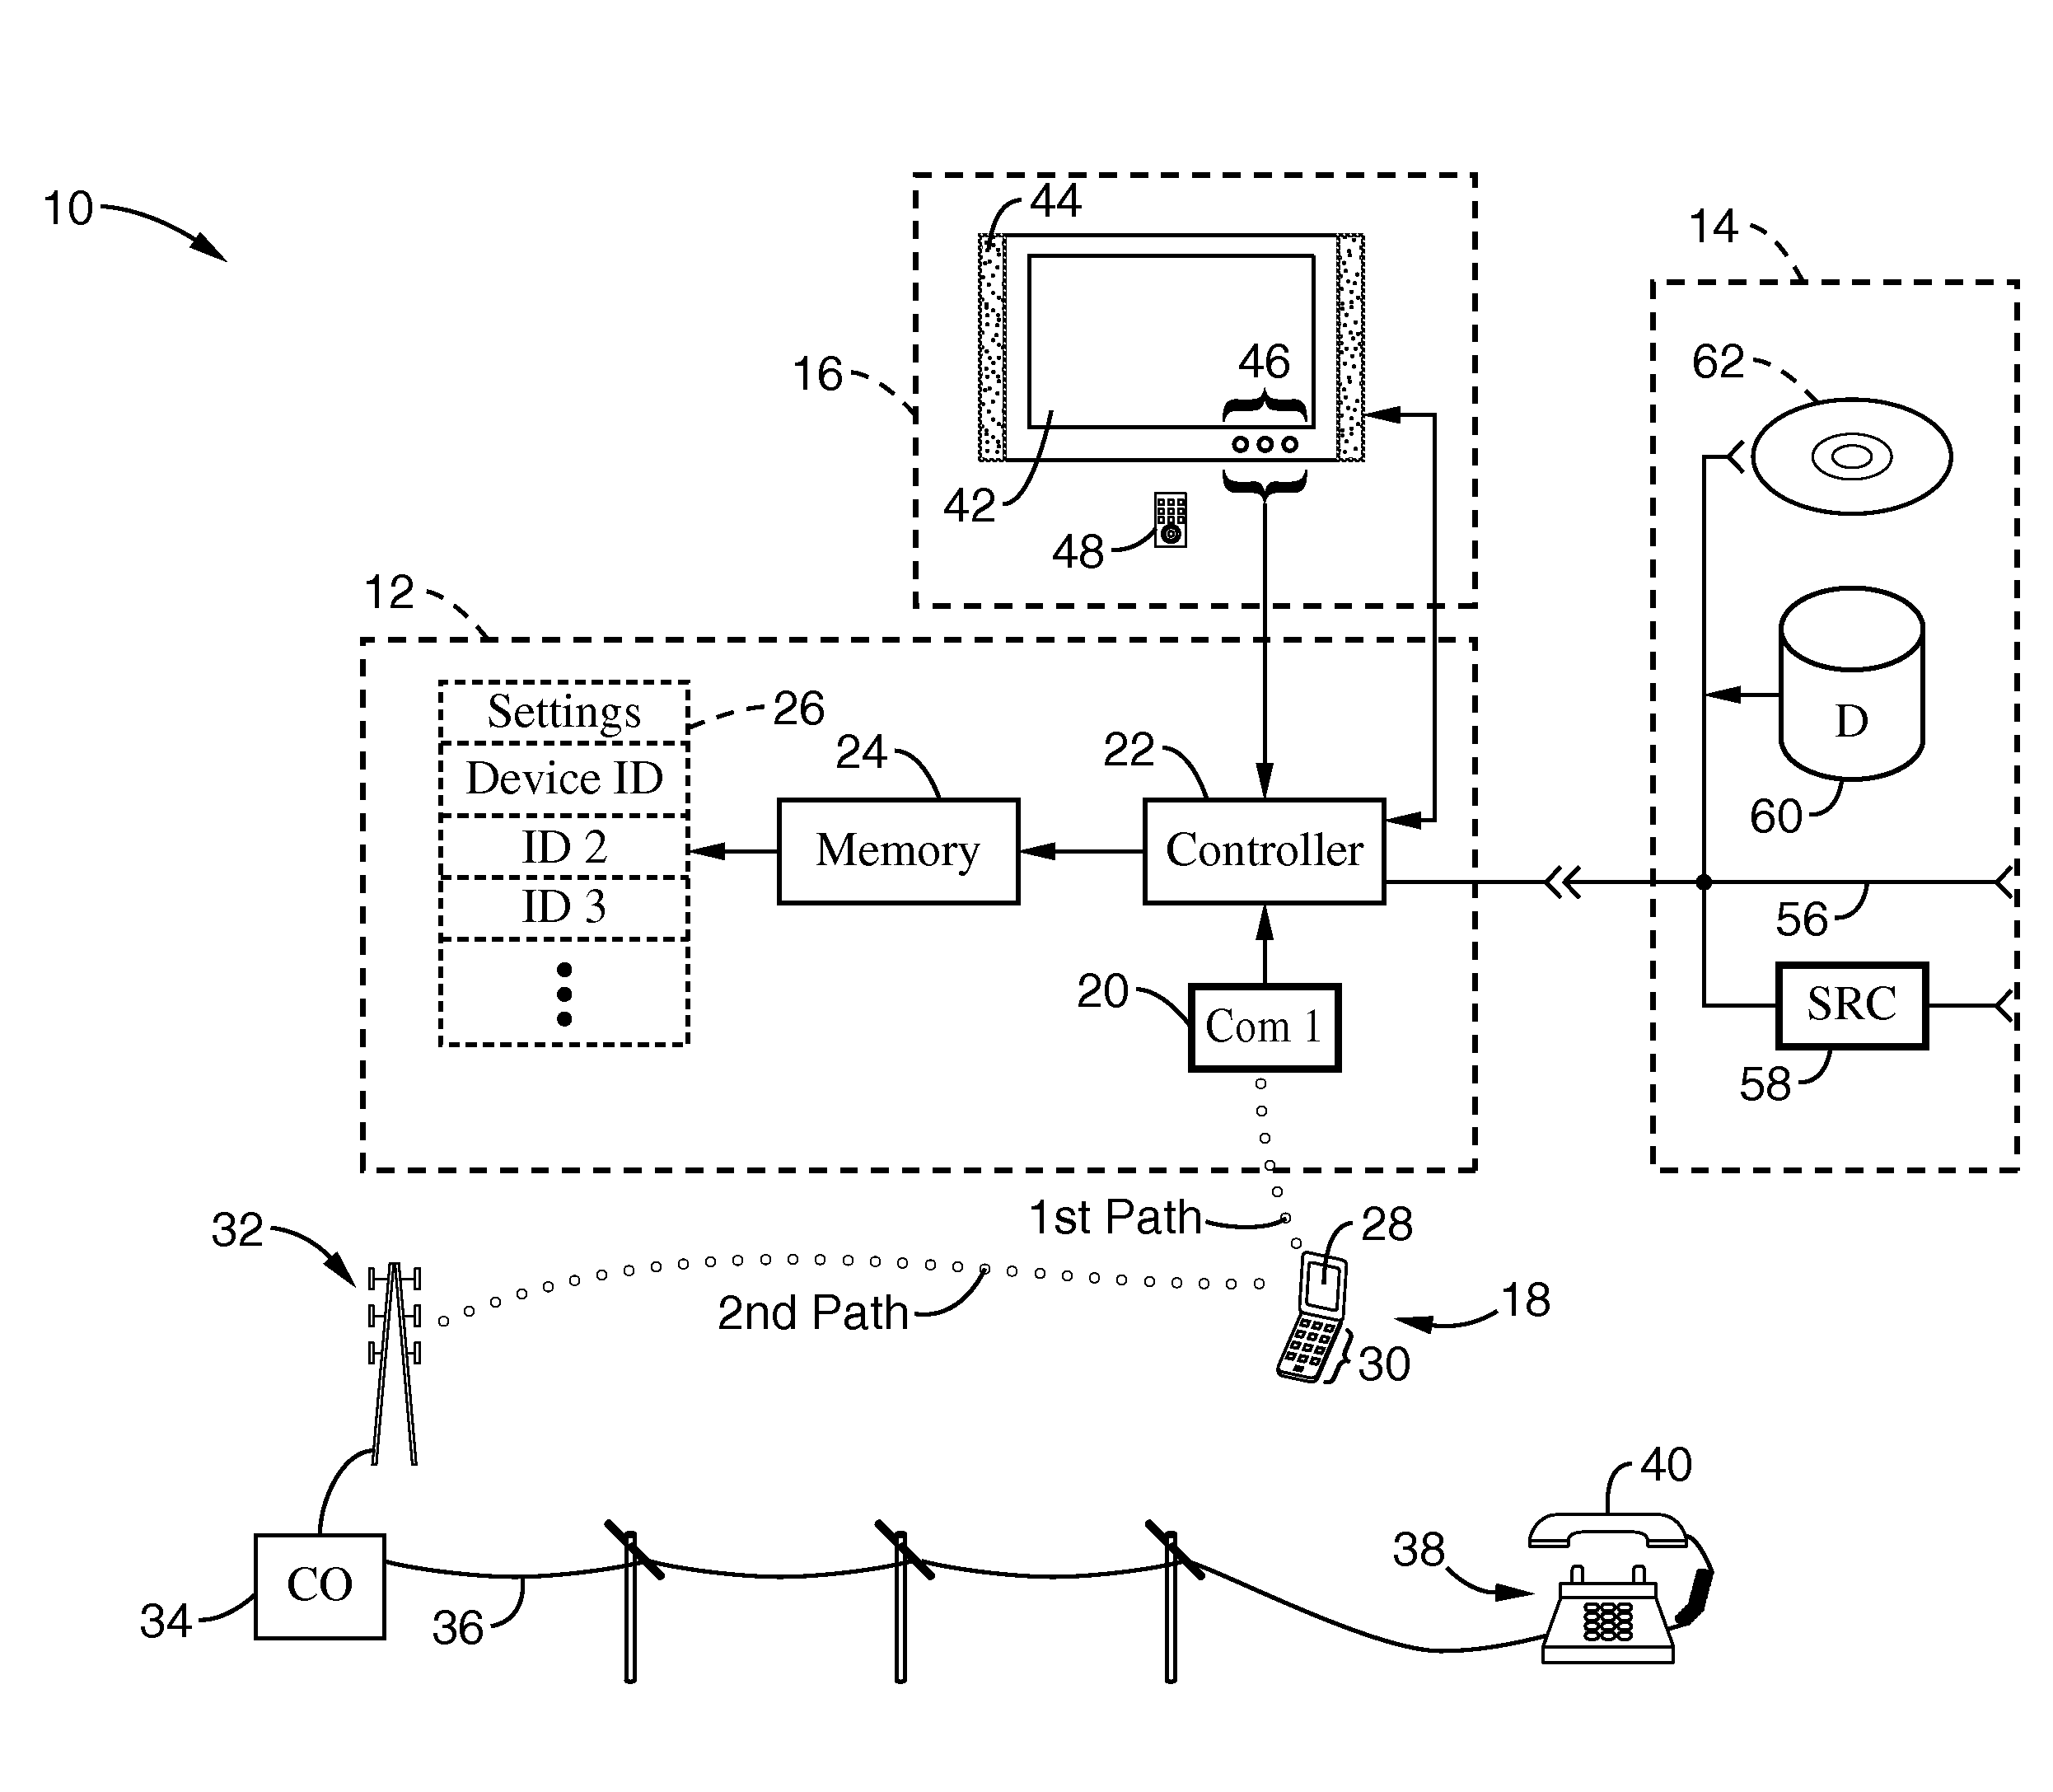 Apparatus and method for collaborating between a video device and a telephonic device